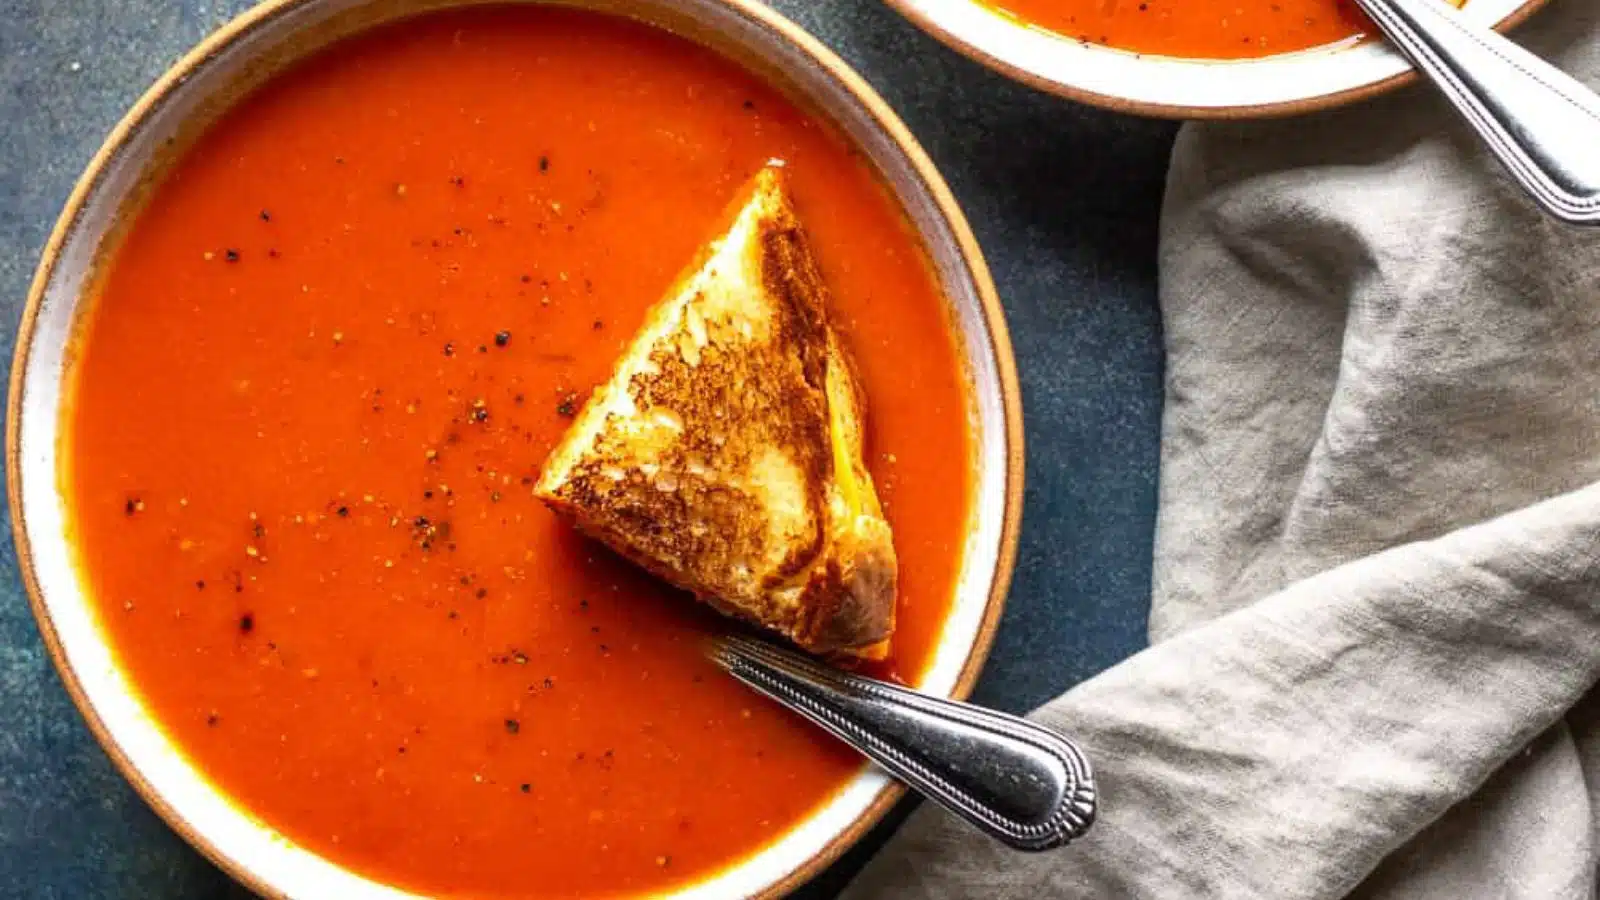 overhead view of a bowl of tomato soup with cracked pepper and a grilled sandwich wedge